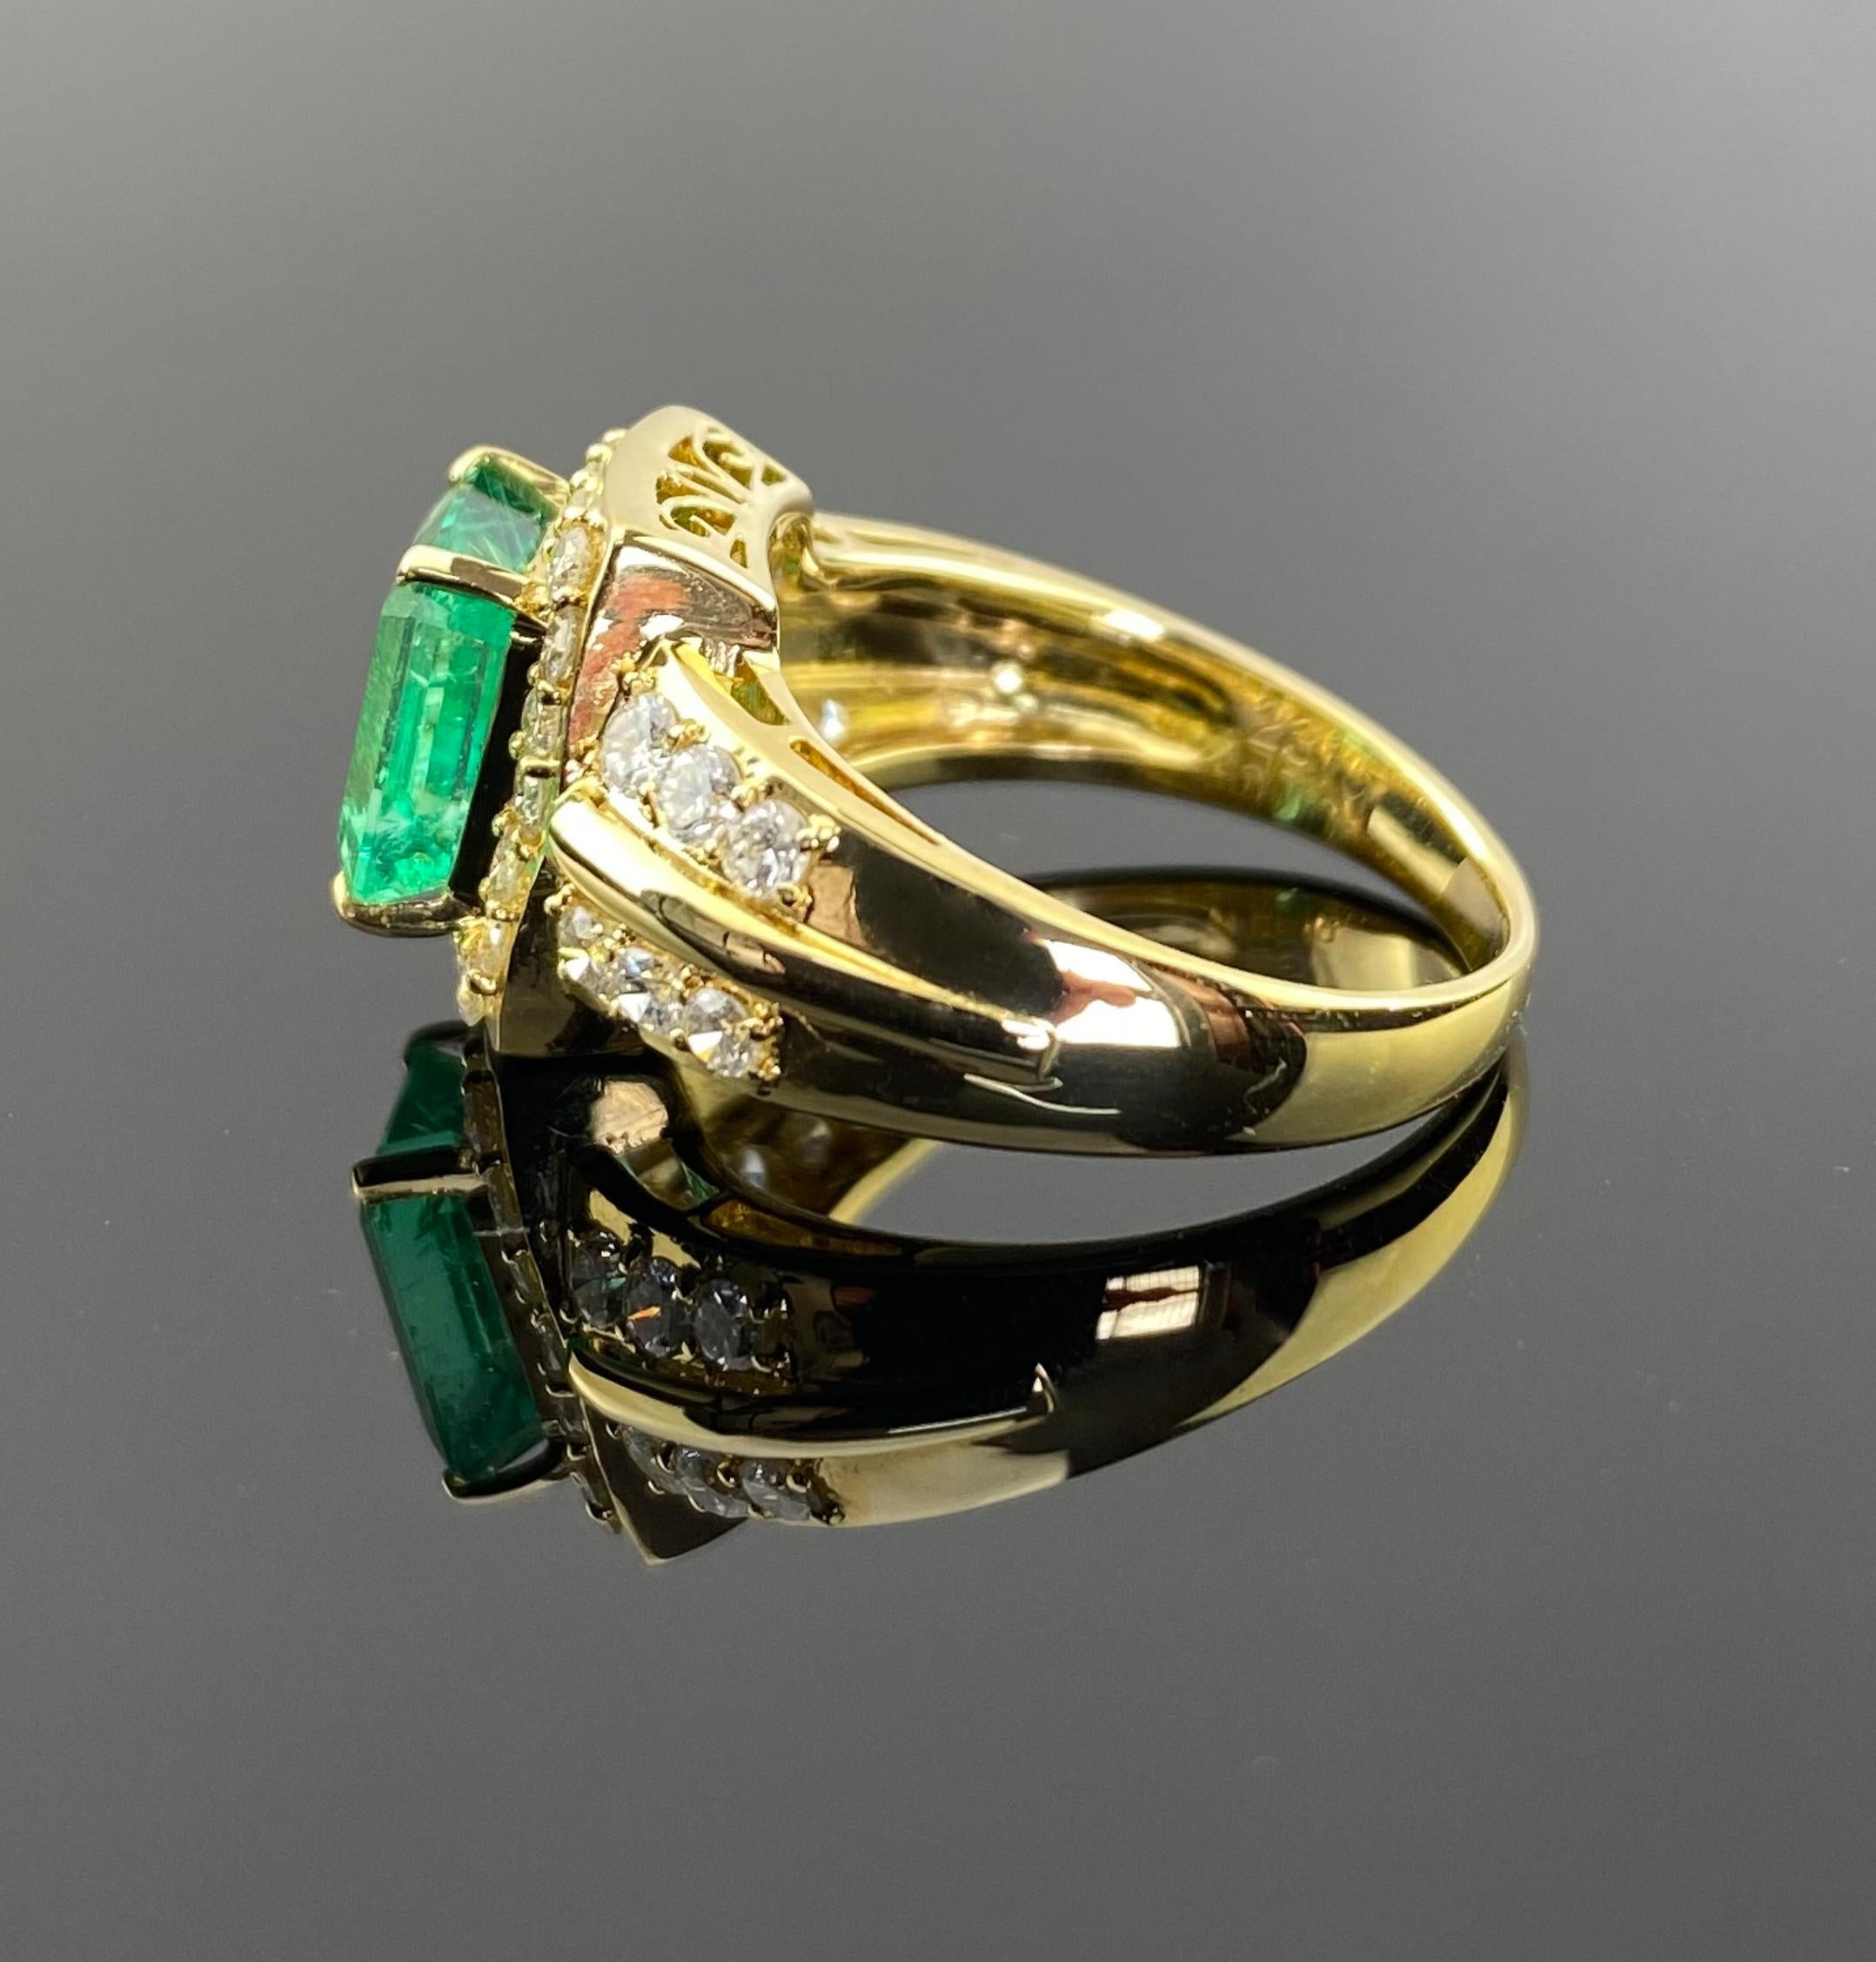 Art Deco Certified 2.31 Carat Colombian Emerald and Diamond Cocktail Ring in 18K Gold For Sale